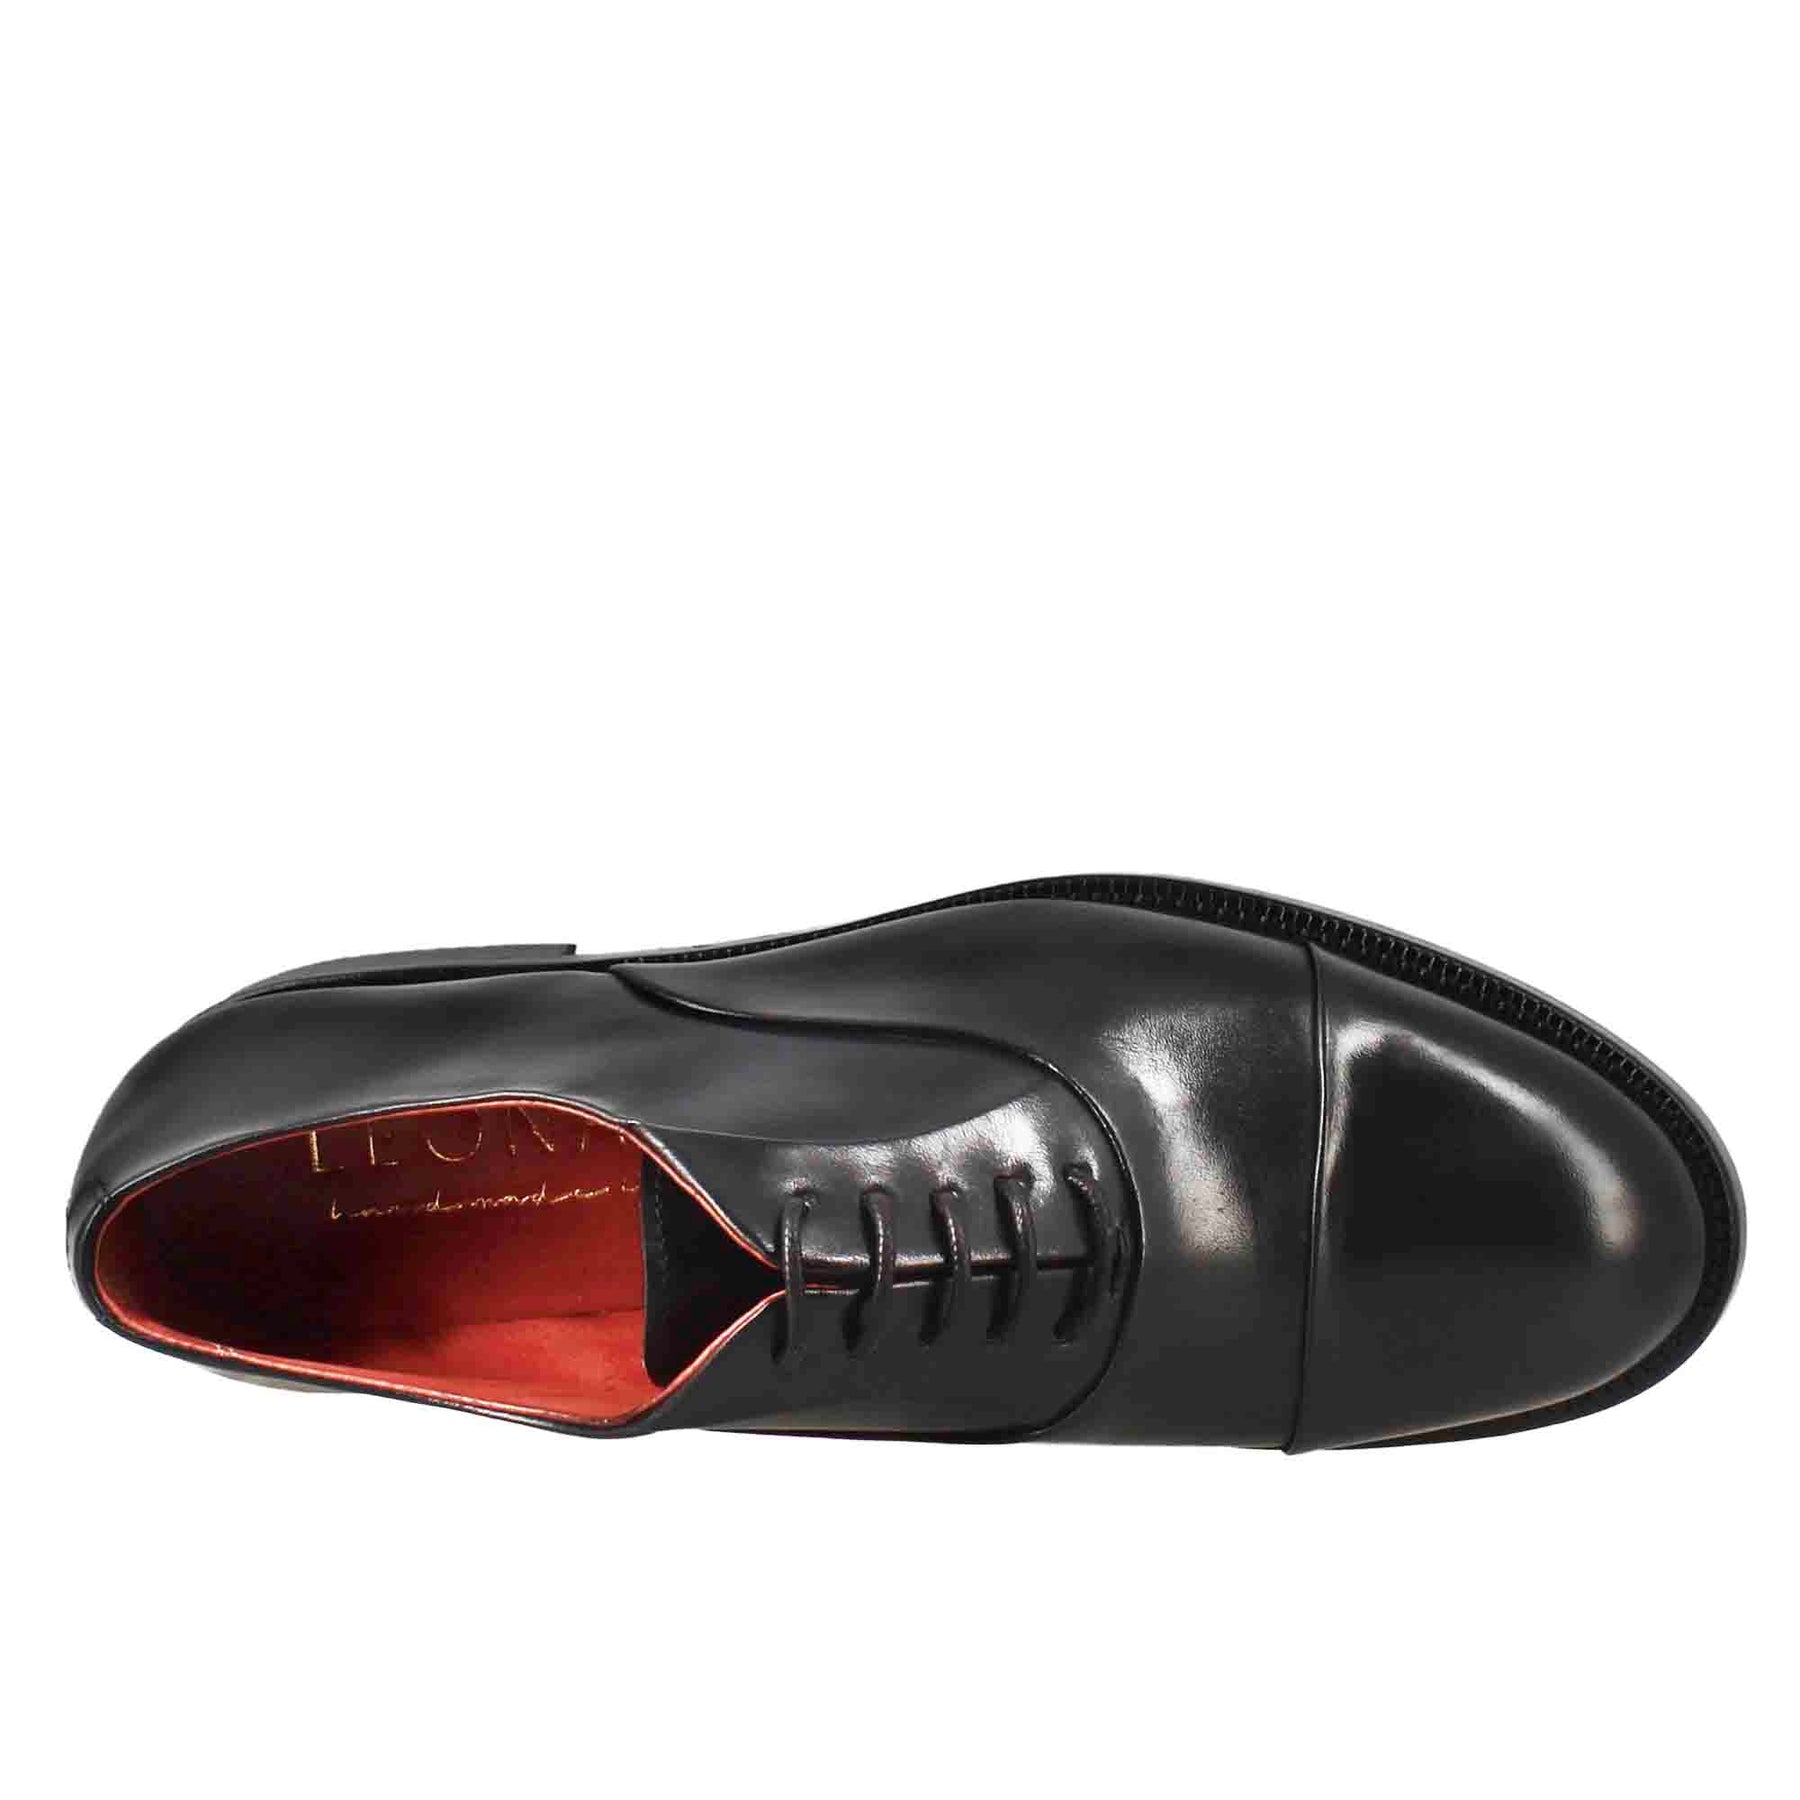 Women's brogues sewn on the toe in black leather